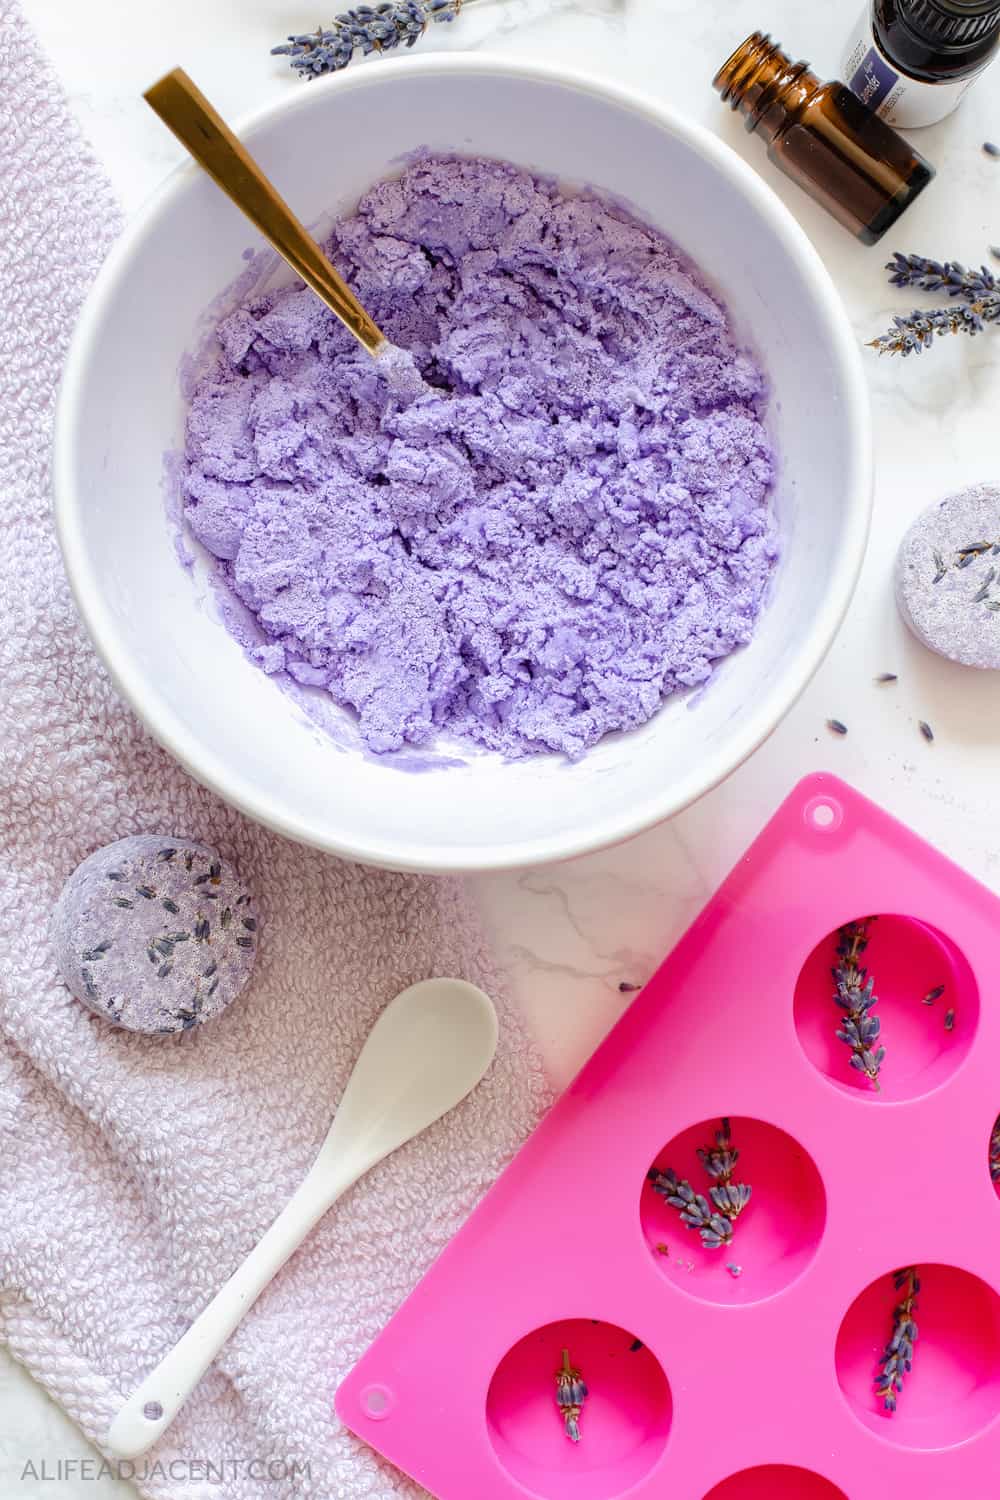 How to make lavender shower melts – mixing ingredients.